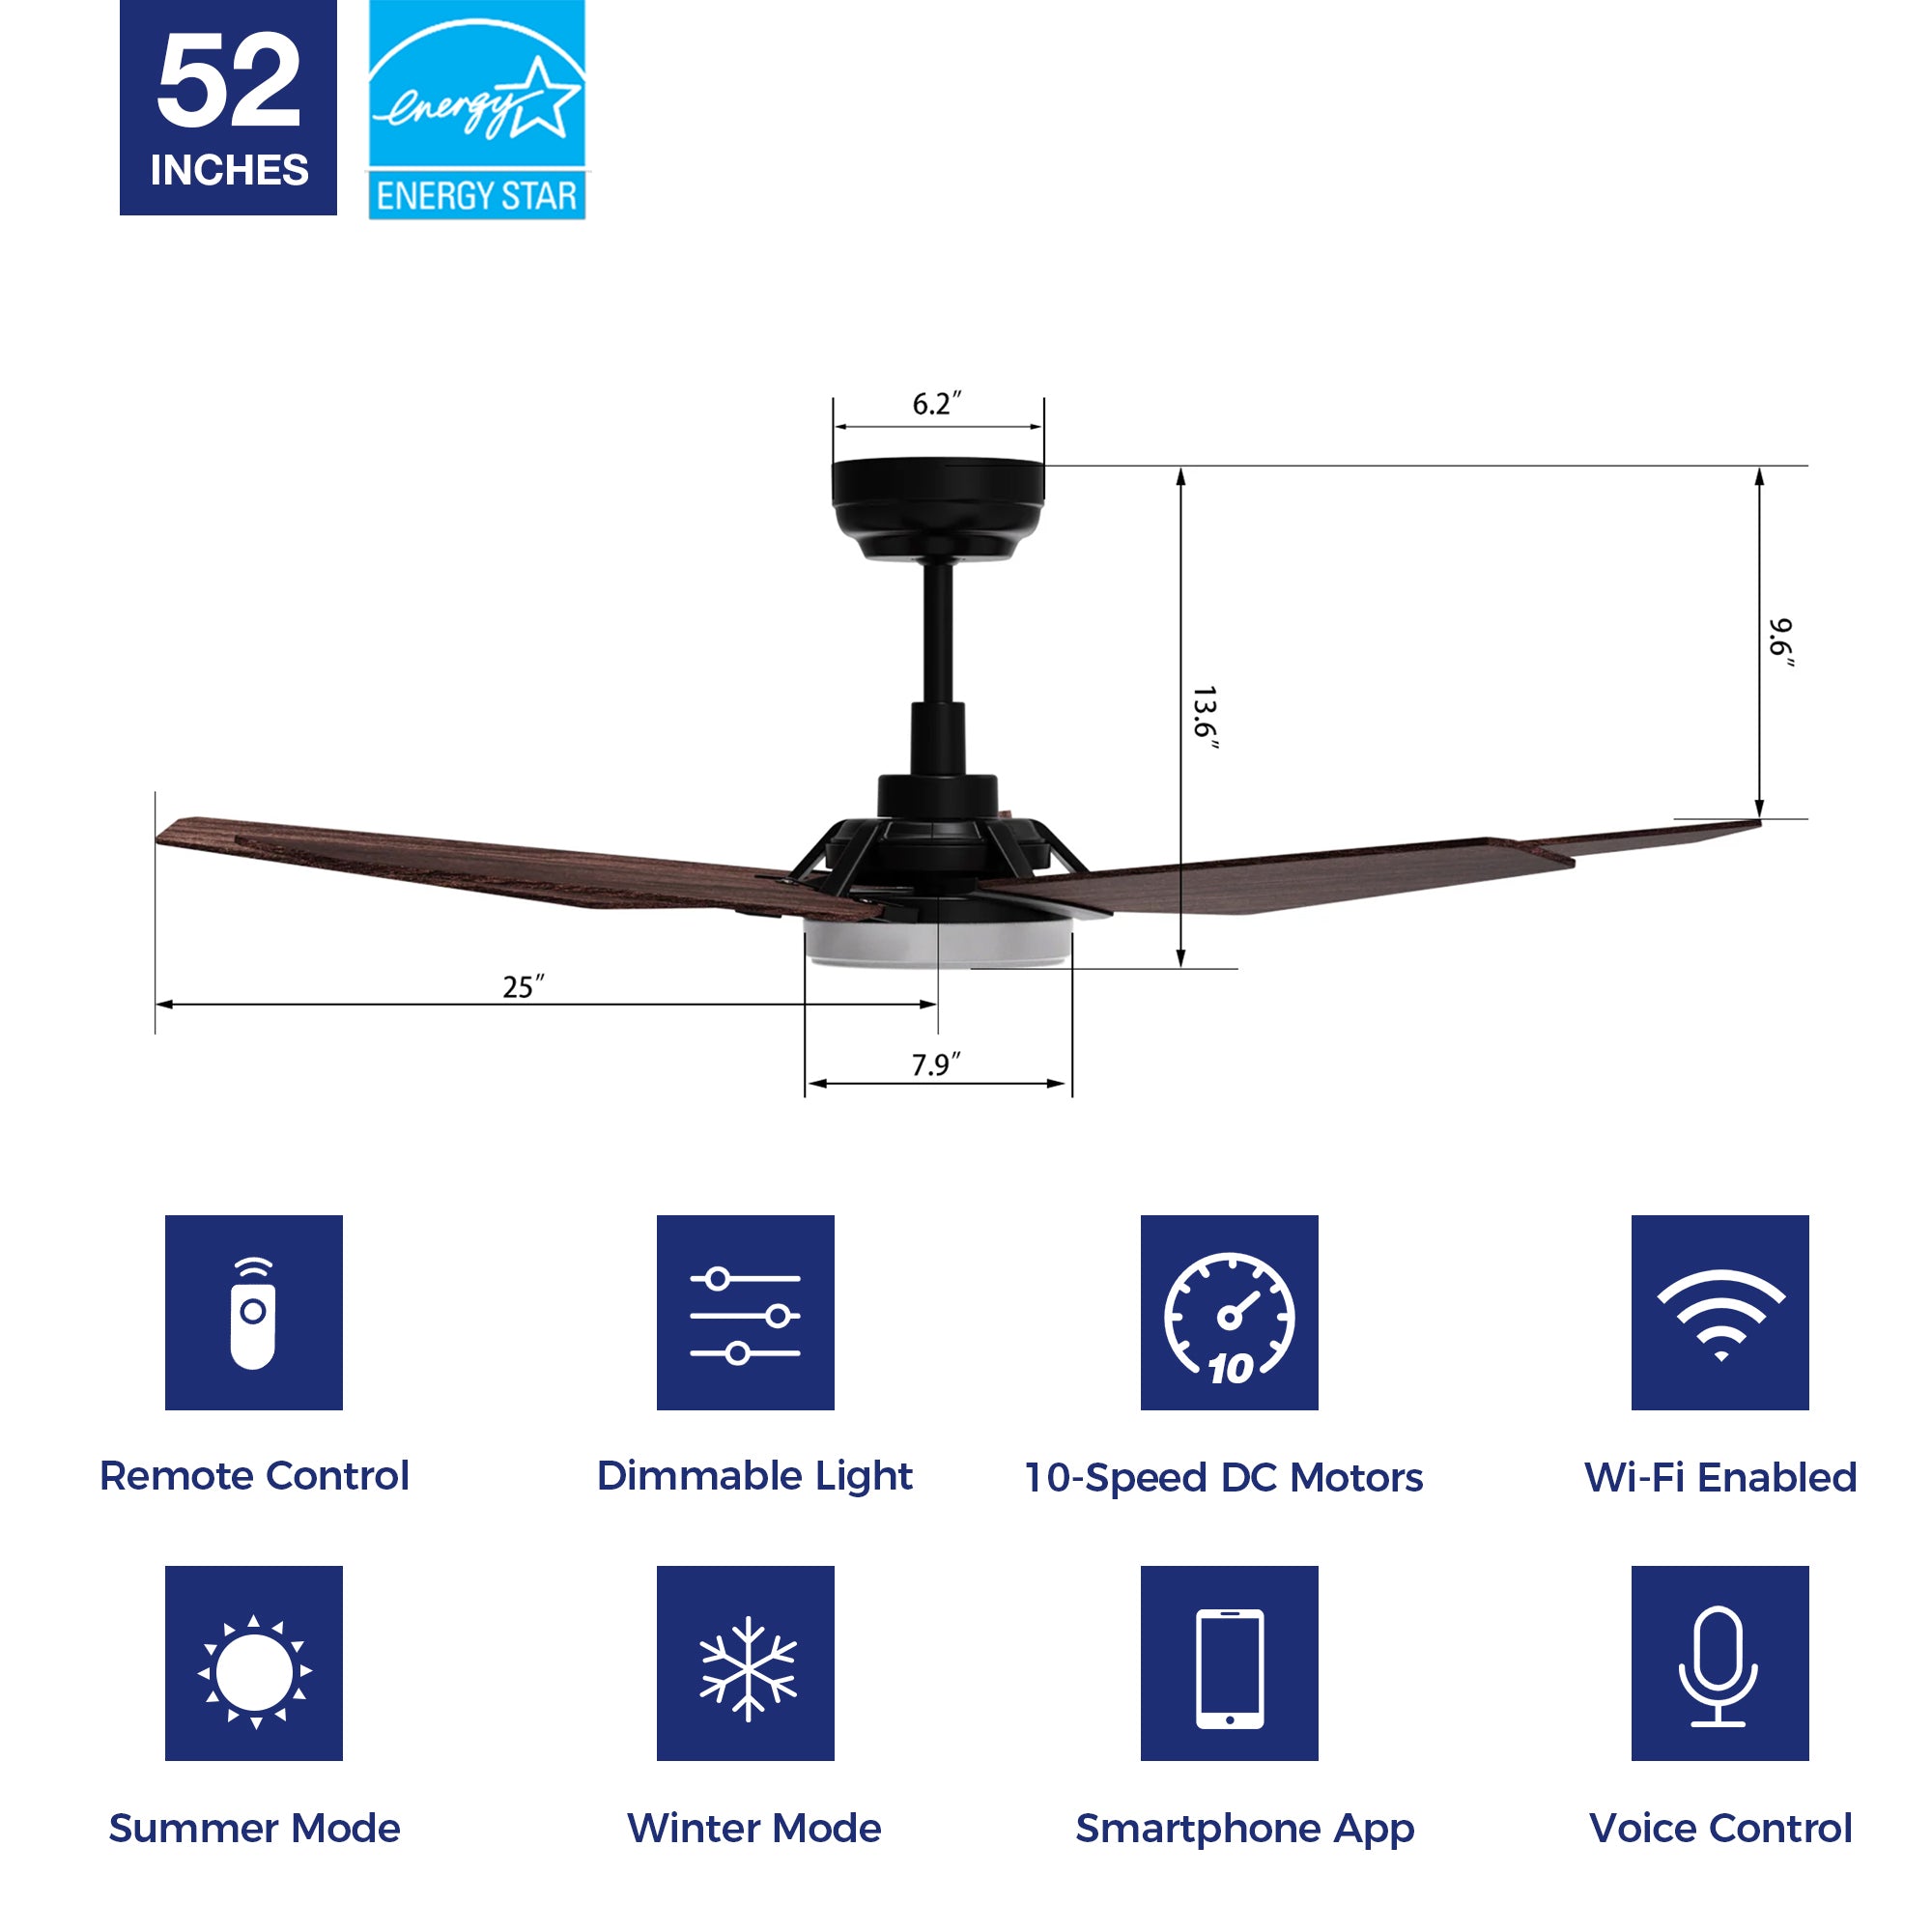 The Smafan Voyager 52&#39;&#39; smart ceiling fan keeps your space cool, bright, and stylish. It is a soft modern masterpiece perfect for your large indoor living spaces. This Wifi smart ceiling fan is a simplicity designing with elegant Plywood blades, Glass shade and has an integrated 4000K LED daylight. The fan features Remote control, Wi-Fi apps, Siri Shortcut and Voice control technology (compatible with Amazon Alexa and Google Home Assistant ) to set fan preferences.